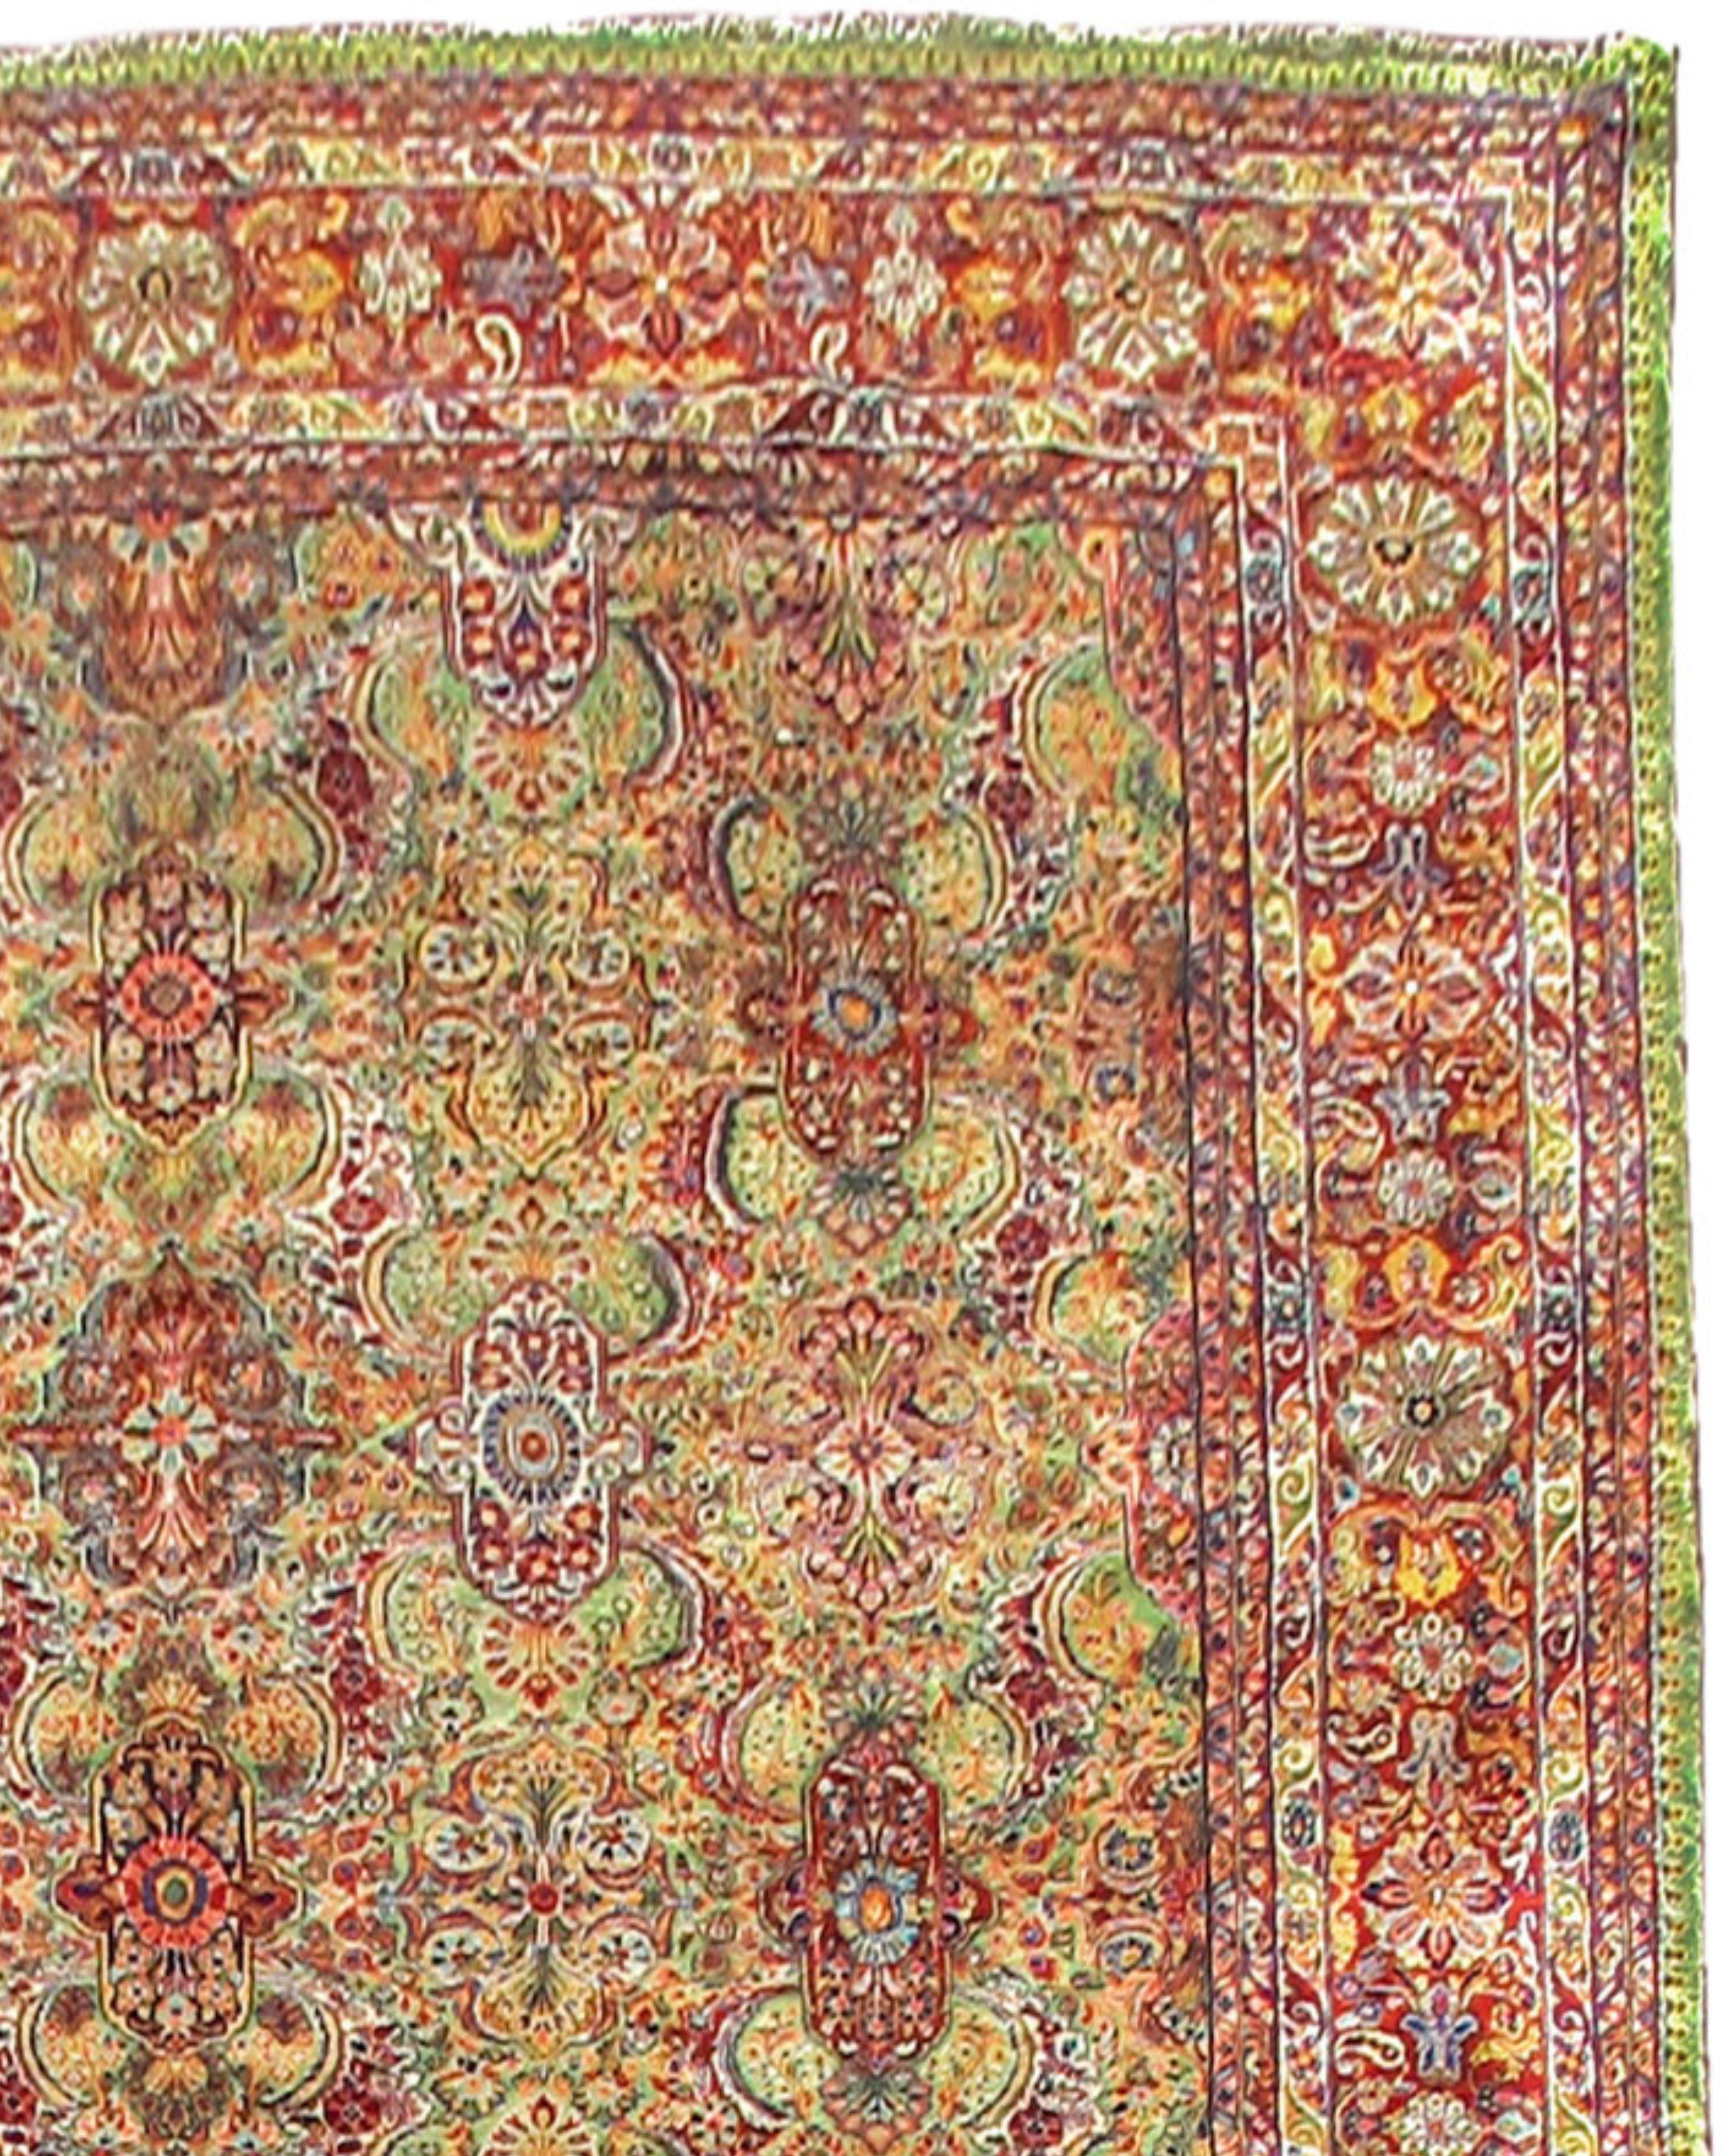 Mahal Sarouk Carpet Rug, 20th century

Very unusual green background.

Additional Information:
Dimensions:12'5